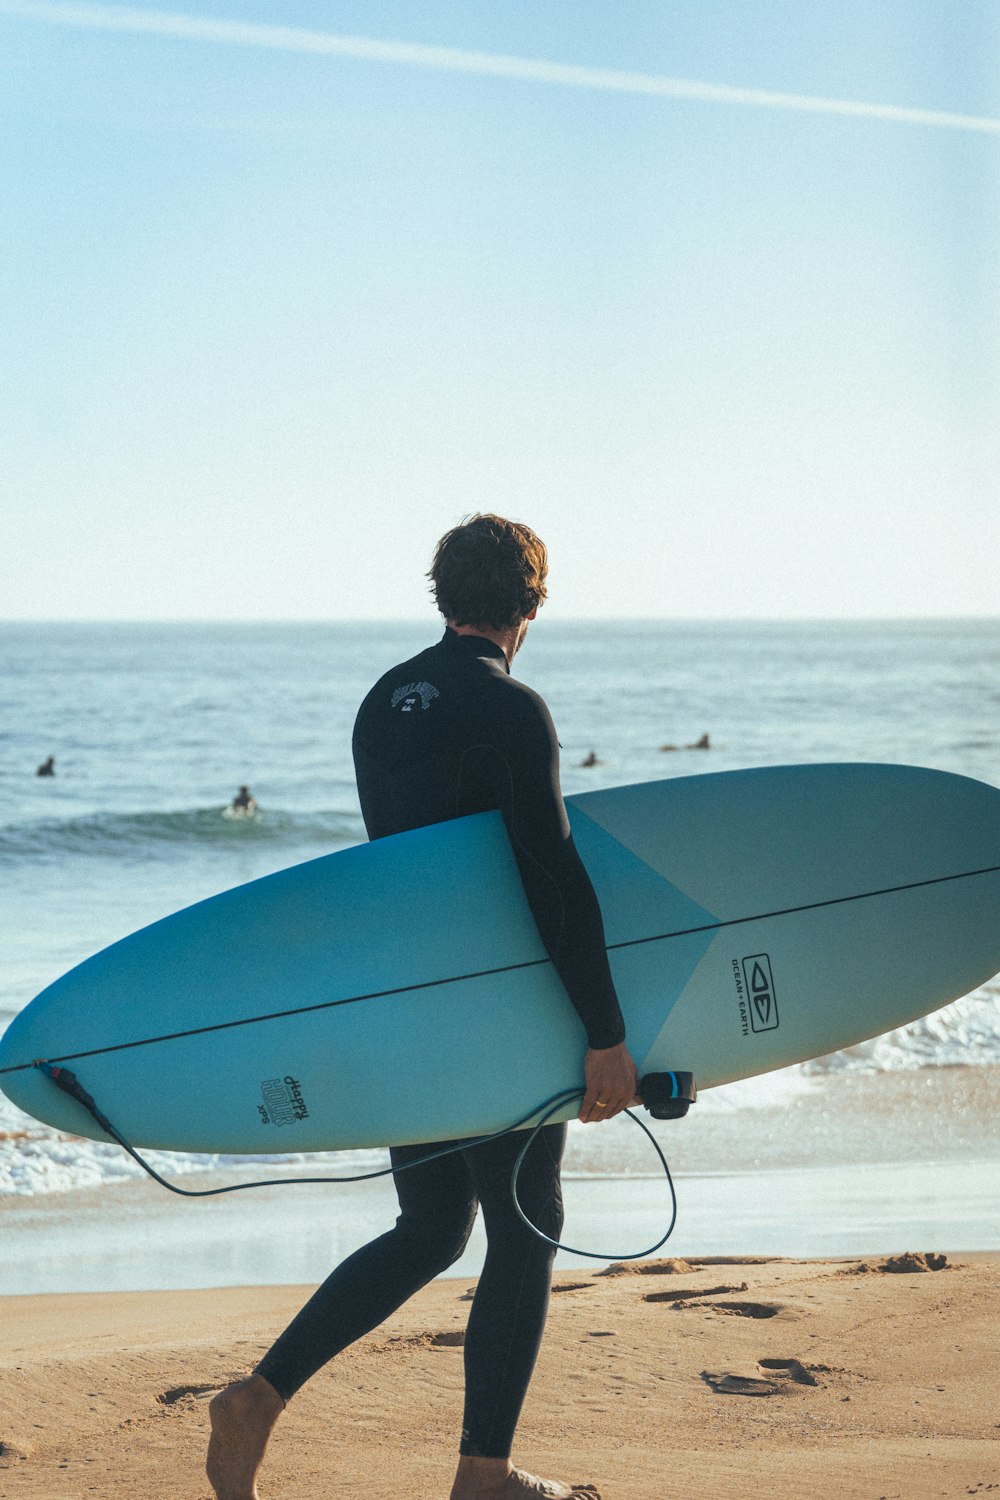 a man in a wet suit carrying a surfboard on the beach